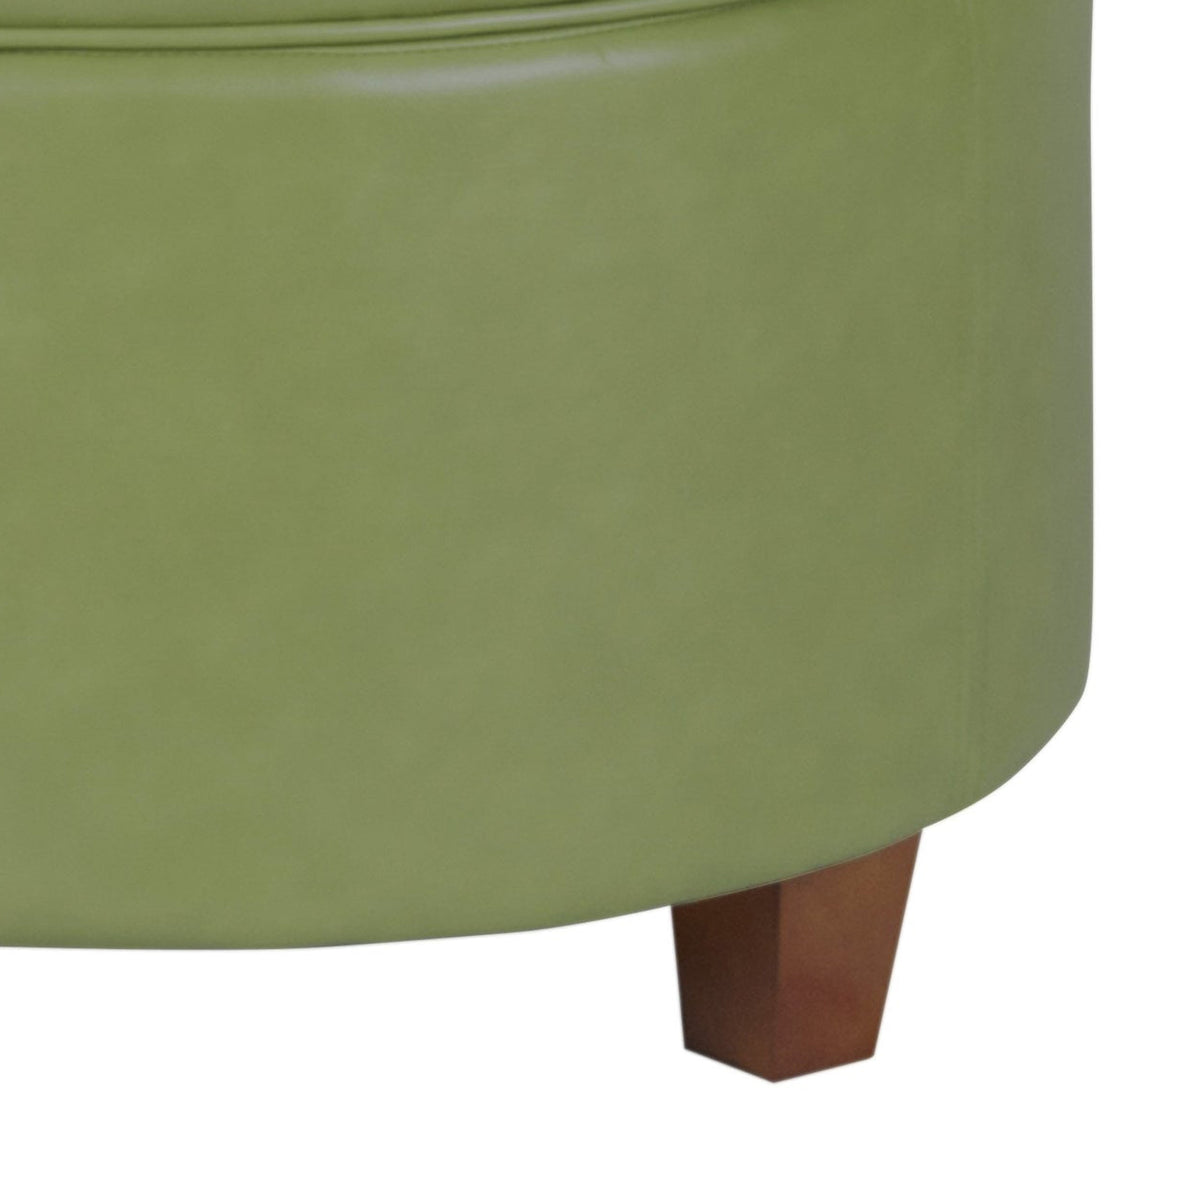 Leatherette Upholstered Wooden Ottoman with Single Button Tufted Lift Top Storage, Green, Large - BM194947